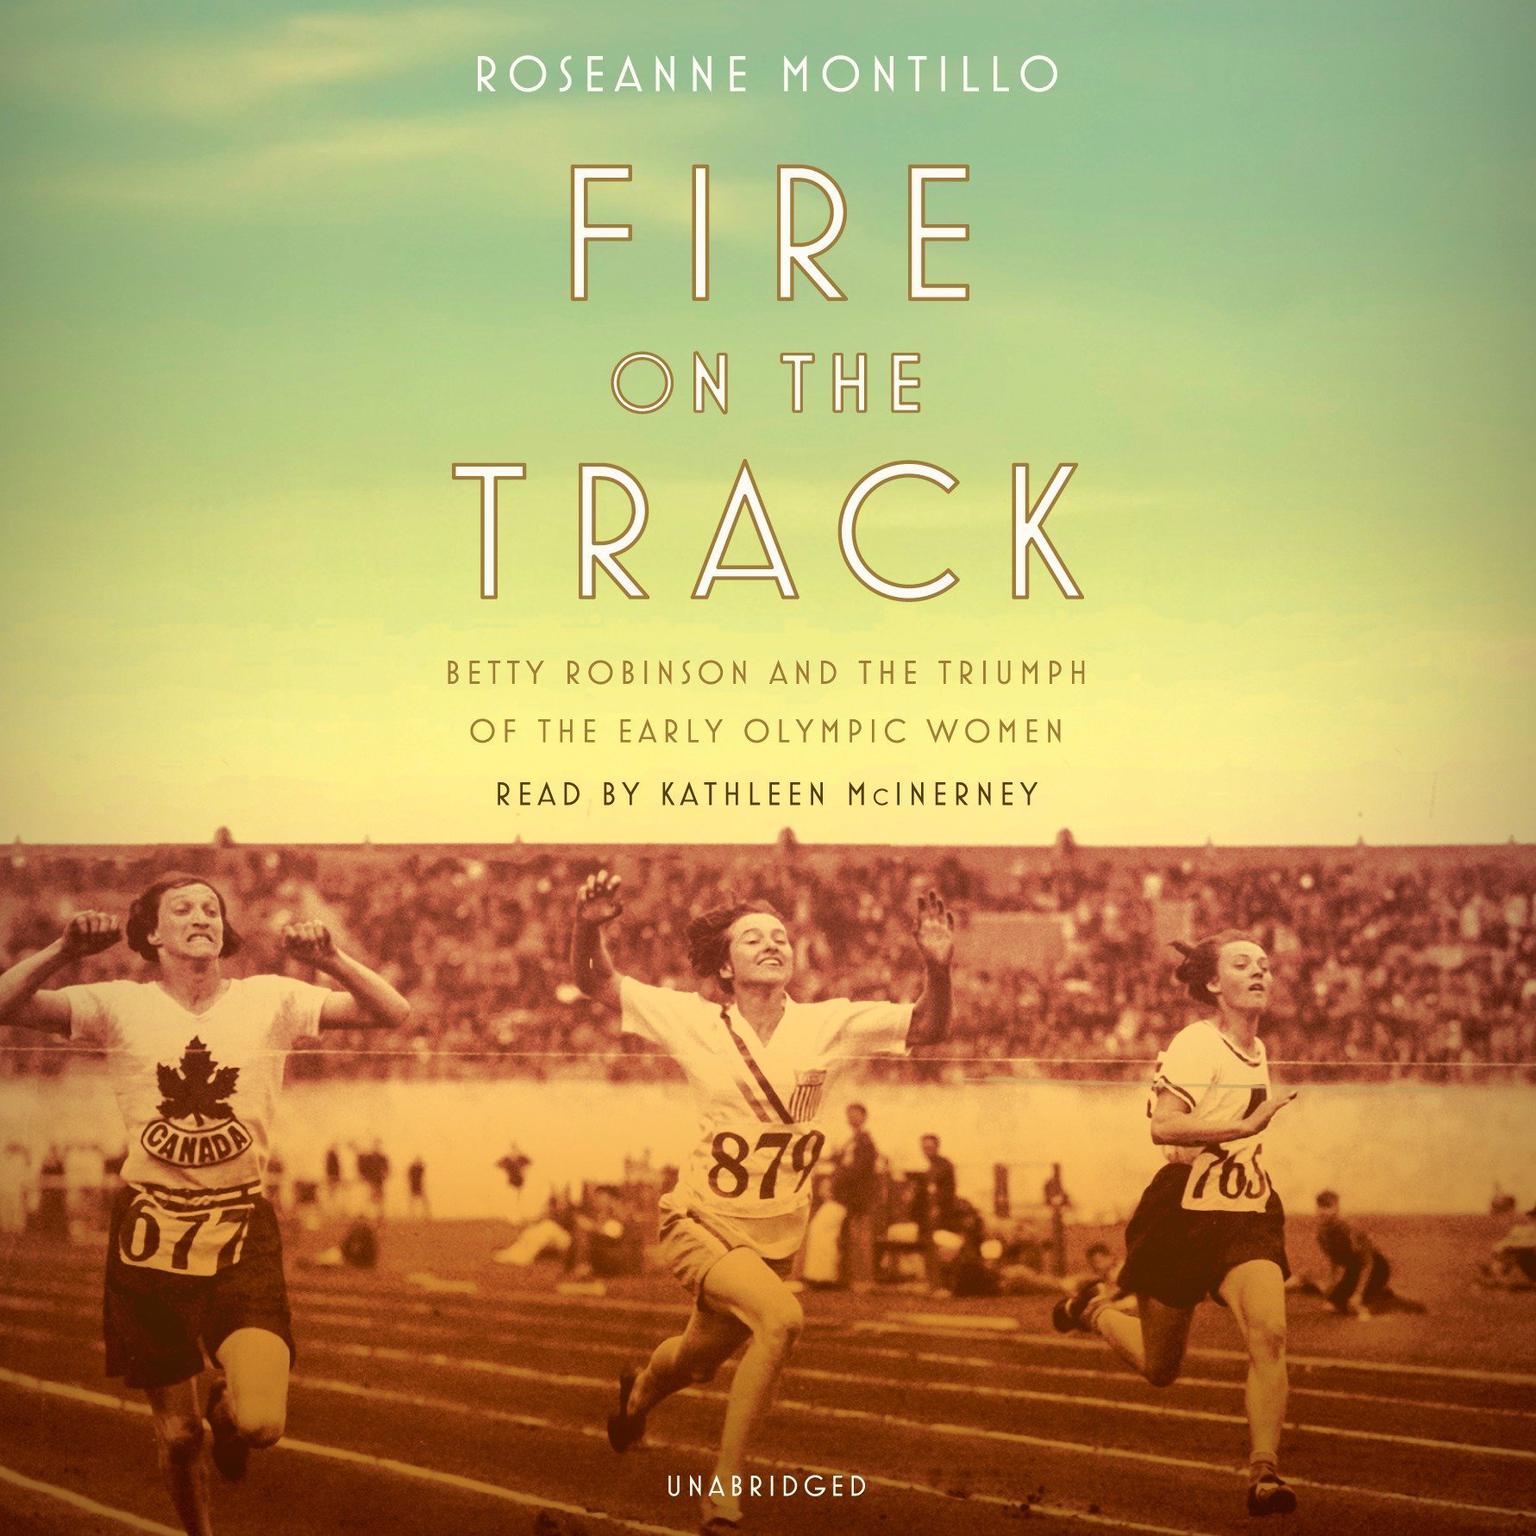 Fire on the Track: Betty Robinson and the Triumph of the Early Olympic Women Audiobook, by Roseanne Montillo